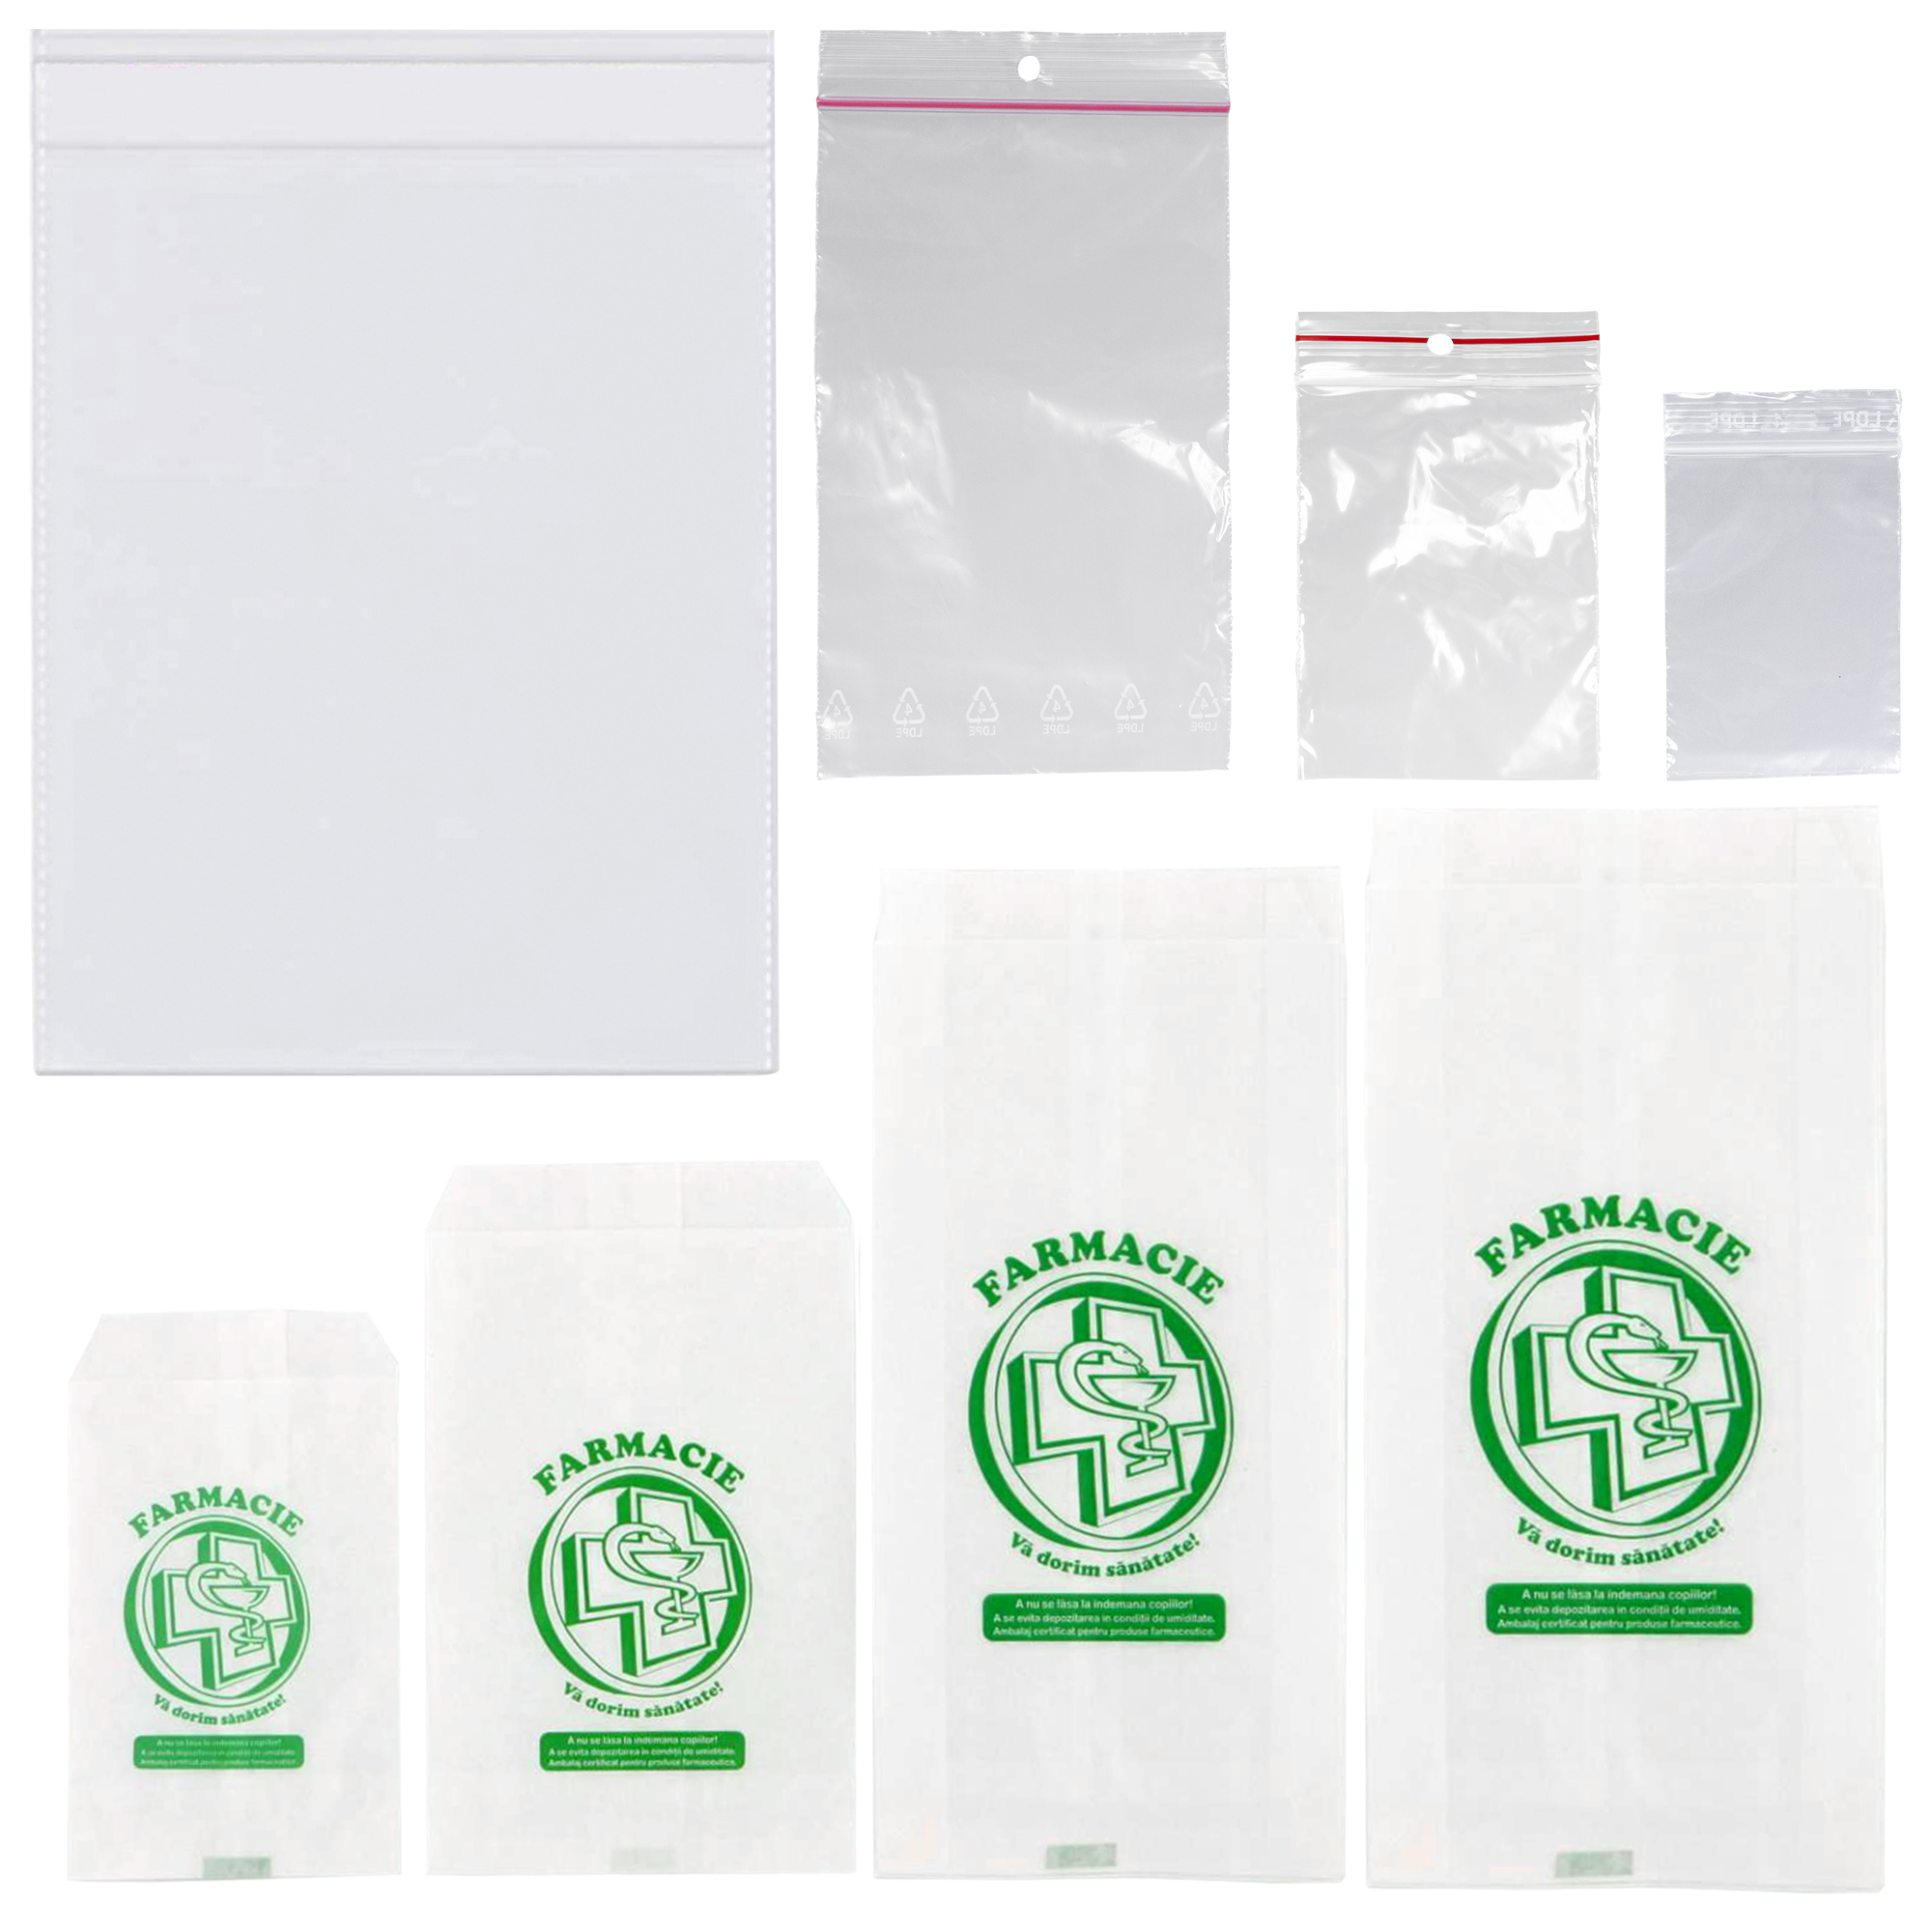 Birotics and Stationary/Stationery and Office Supplies/Packaging Bags